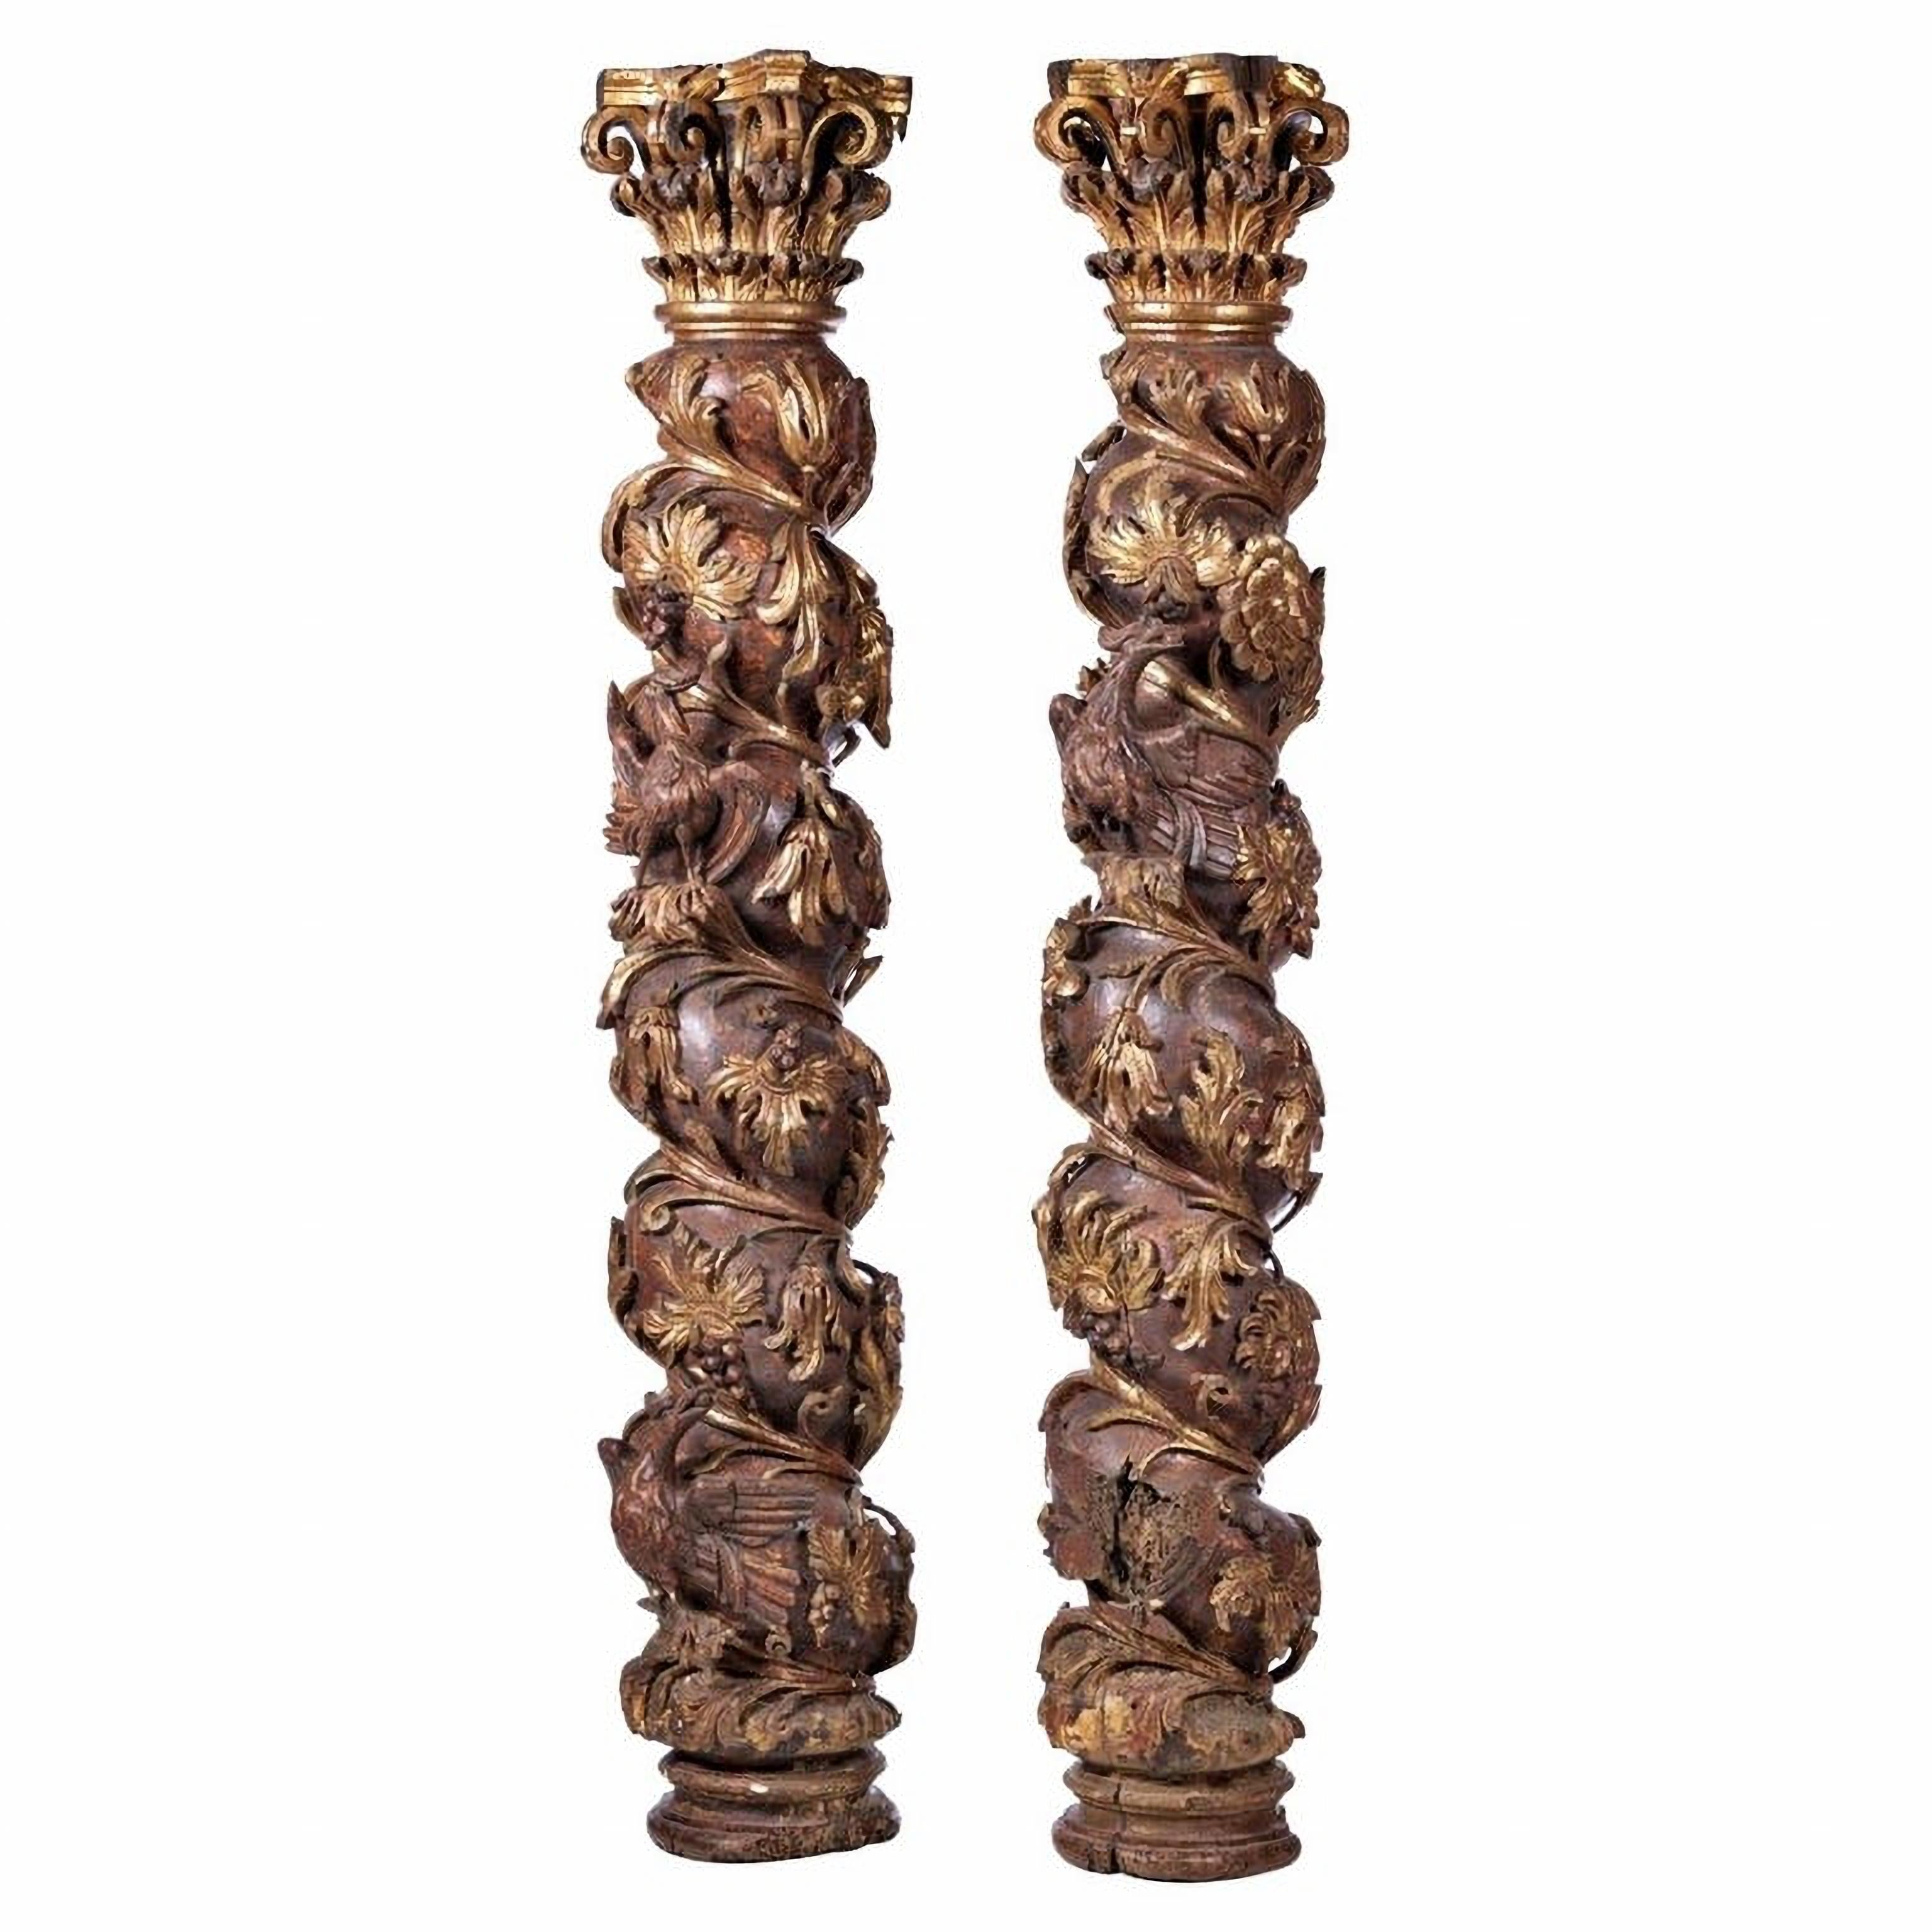 Hand-Crafted Pair of Spanish Spiral Columns of the 17th Century For Sale